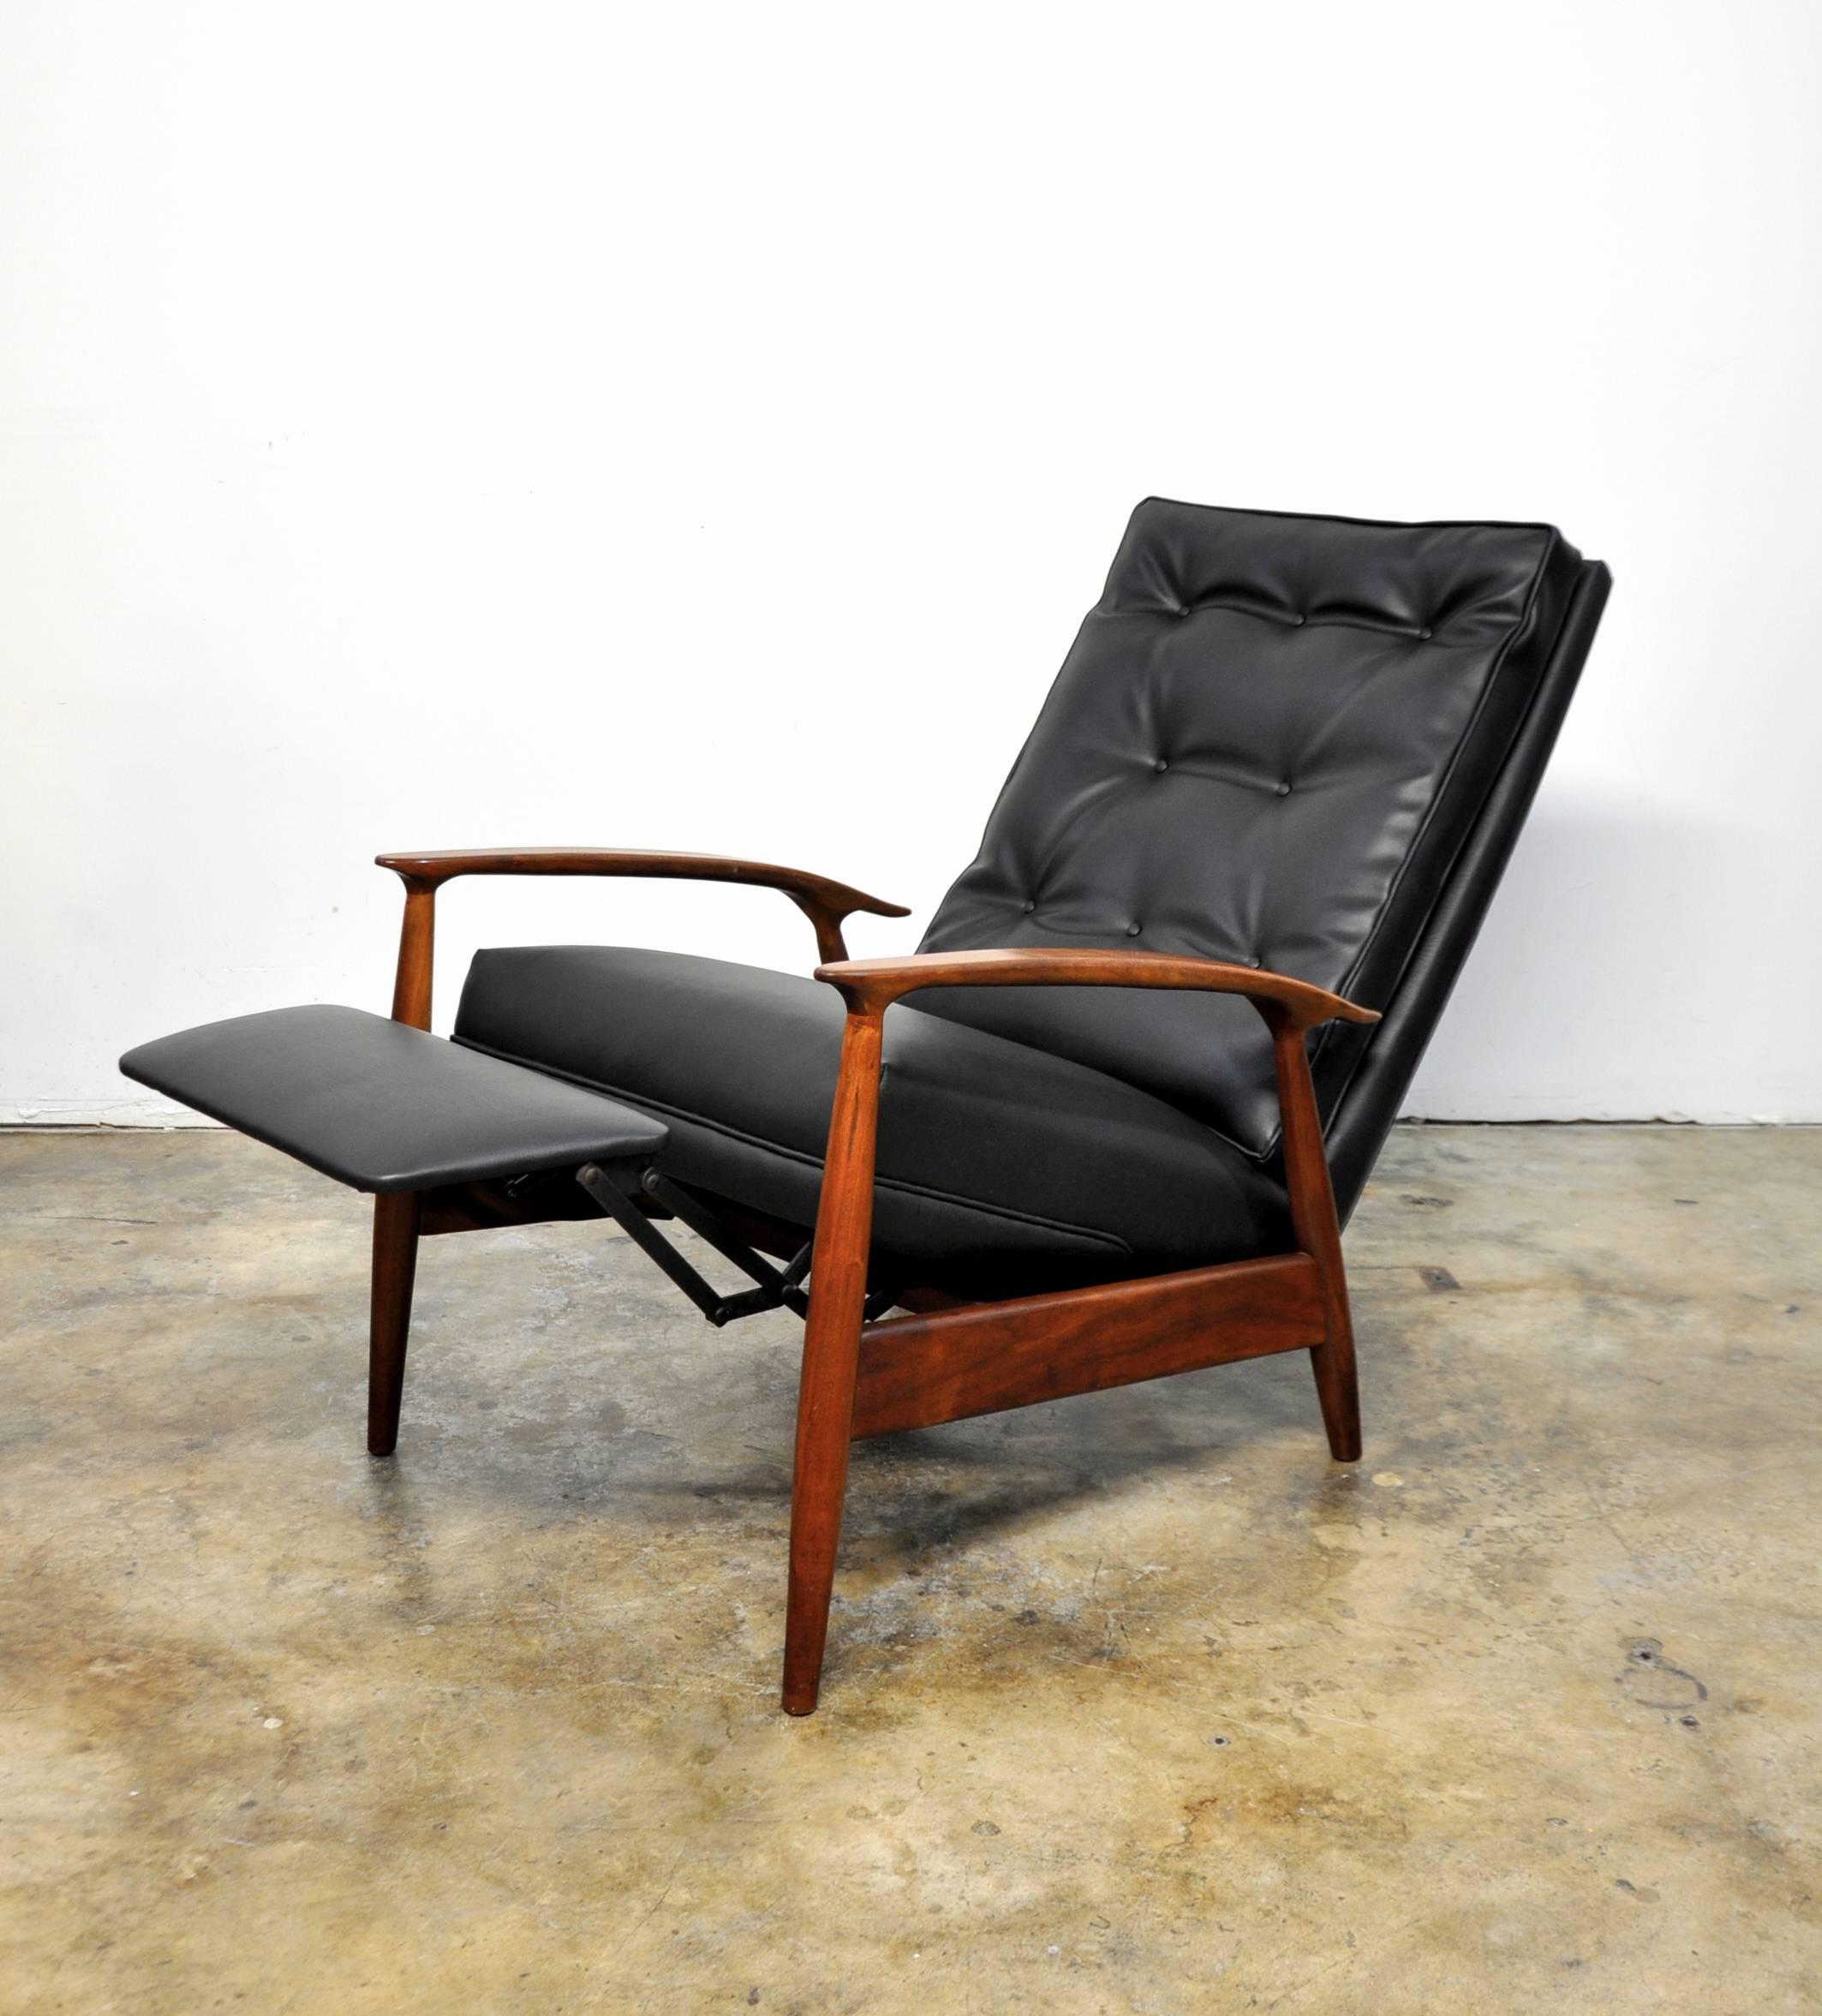 This early example of Milo Baughman's Mid-Century Modern reclining lounge chair dates from the 1950s. It features an amazing, sculptural solid walnut frame that displays beautiful grain. The chair has a tufted back cushion and is very comfortable,